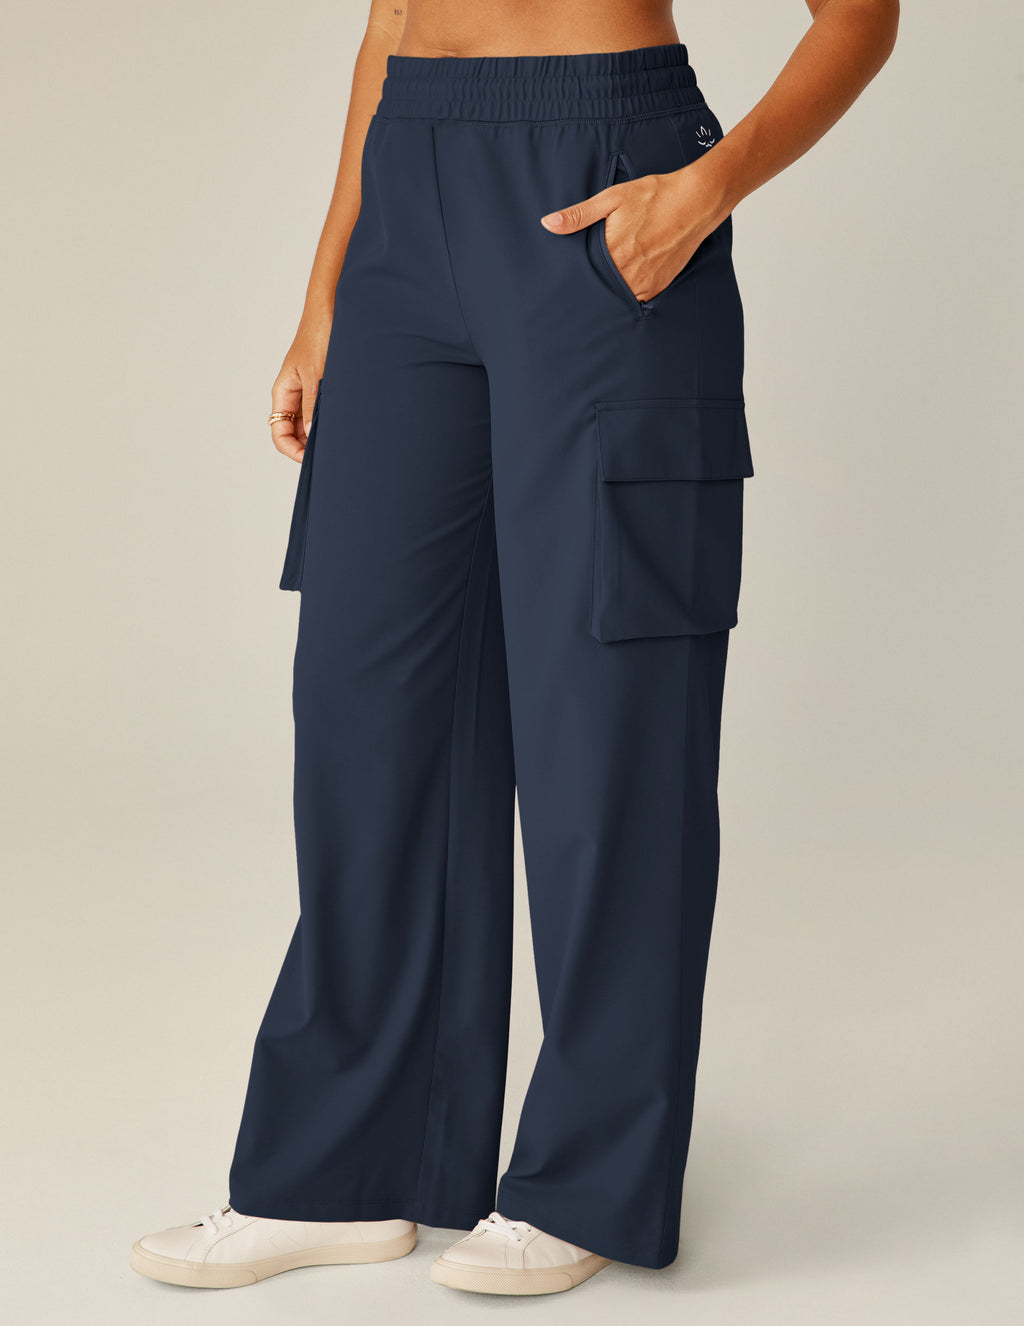 City Chic Cargo Pant Secondary Image